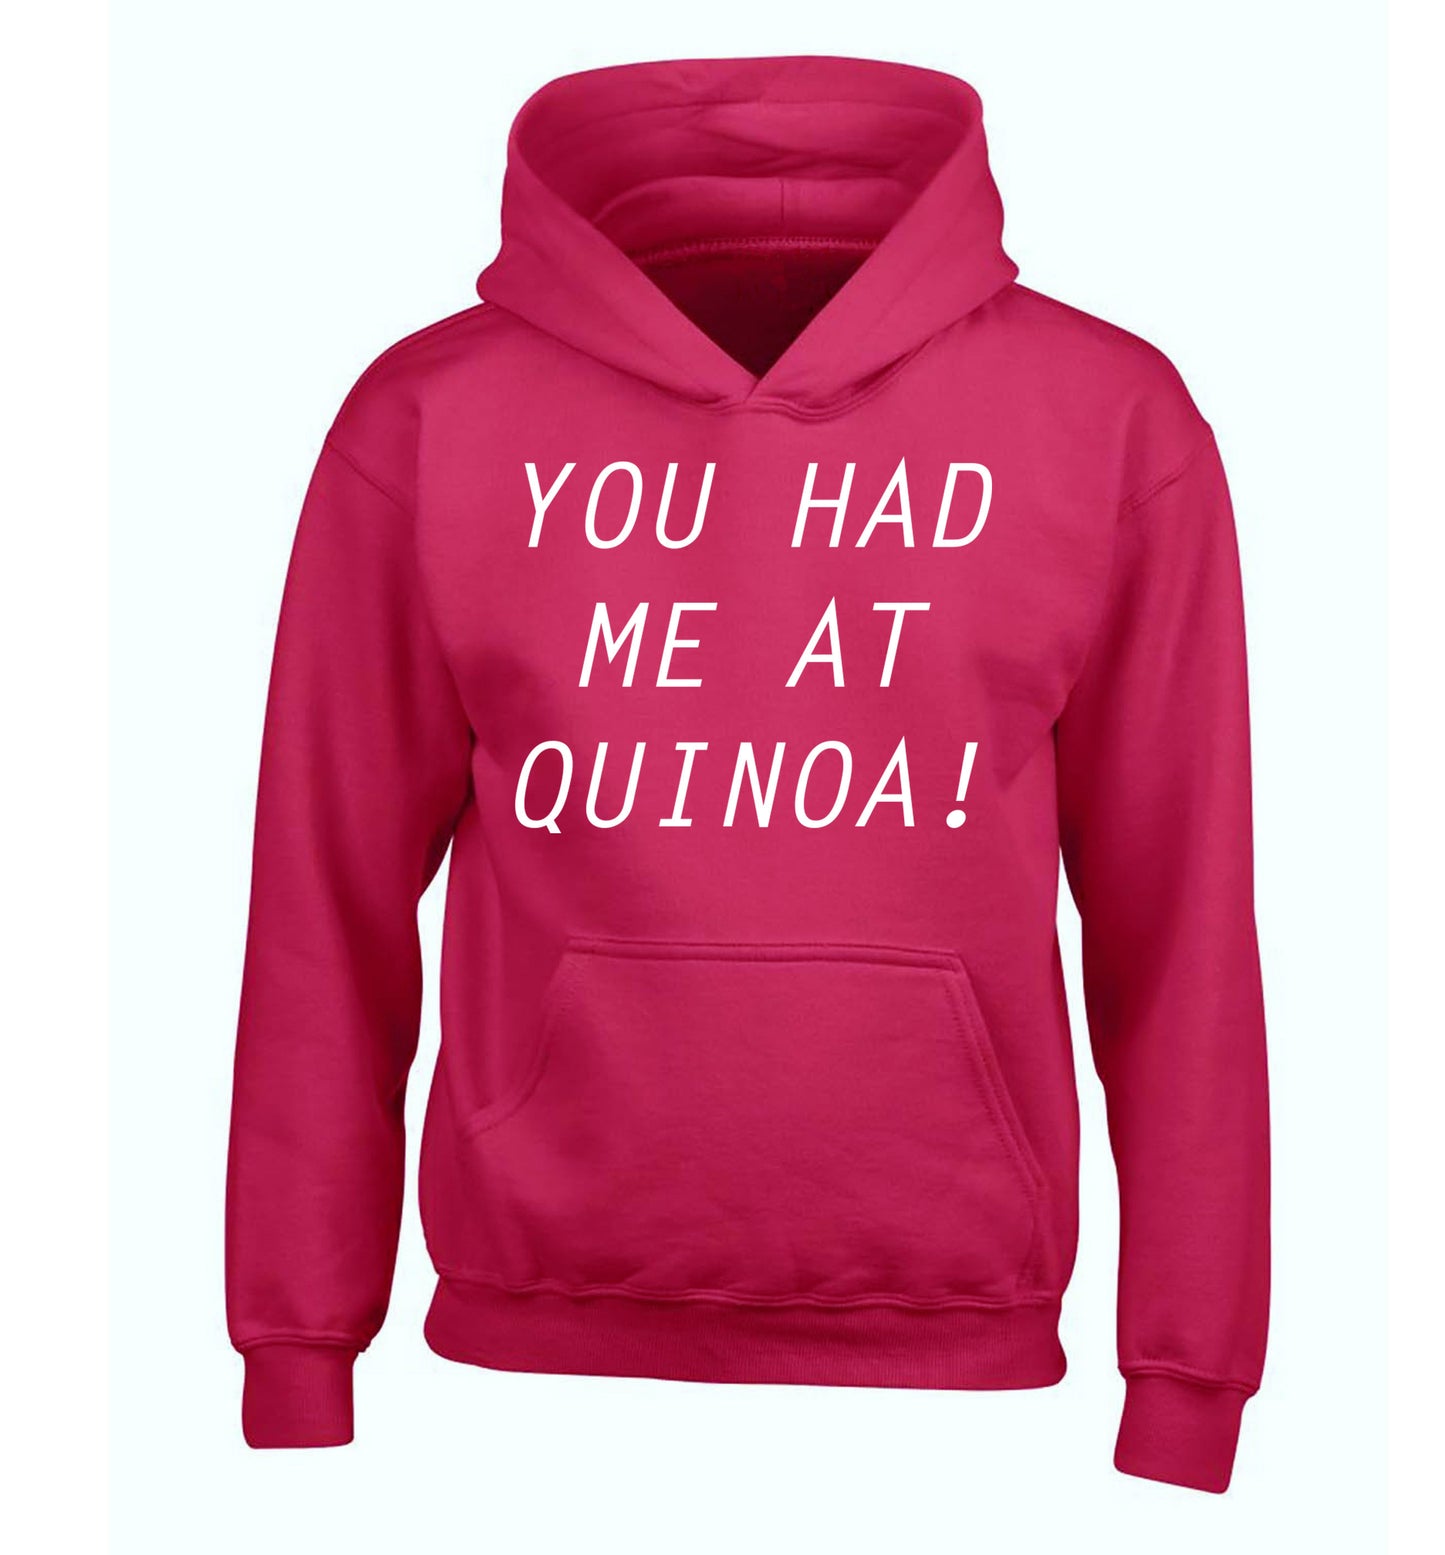 You had me at quinoa children's pink hoodie 12-14 Years